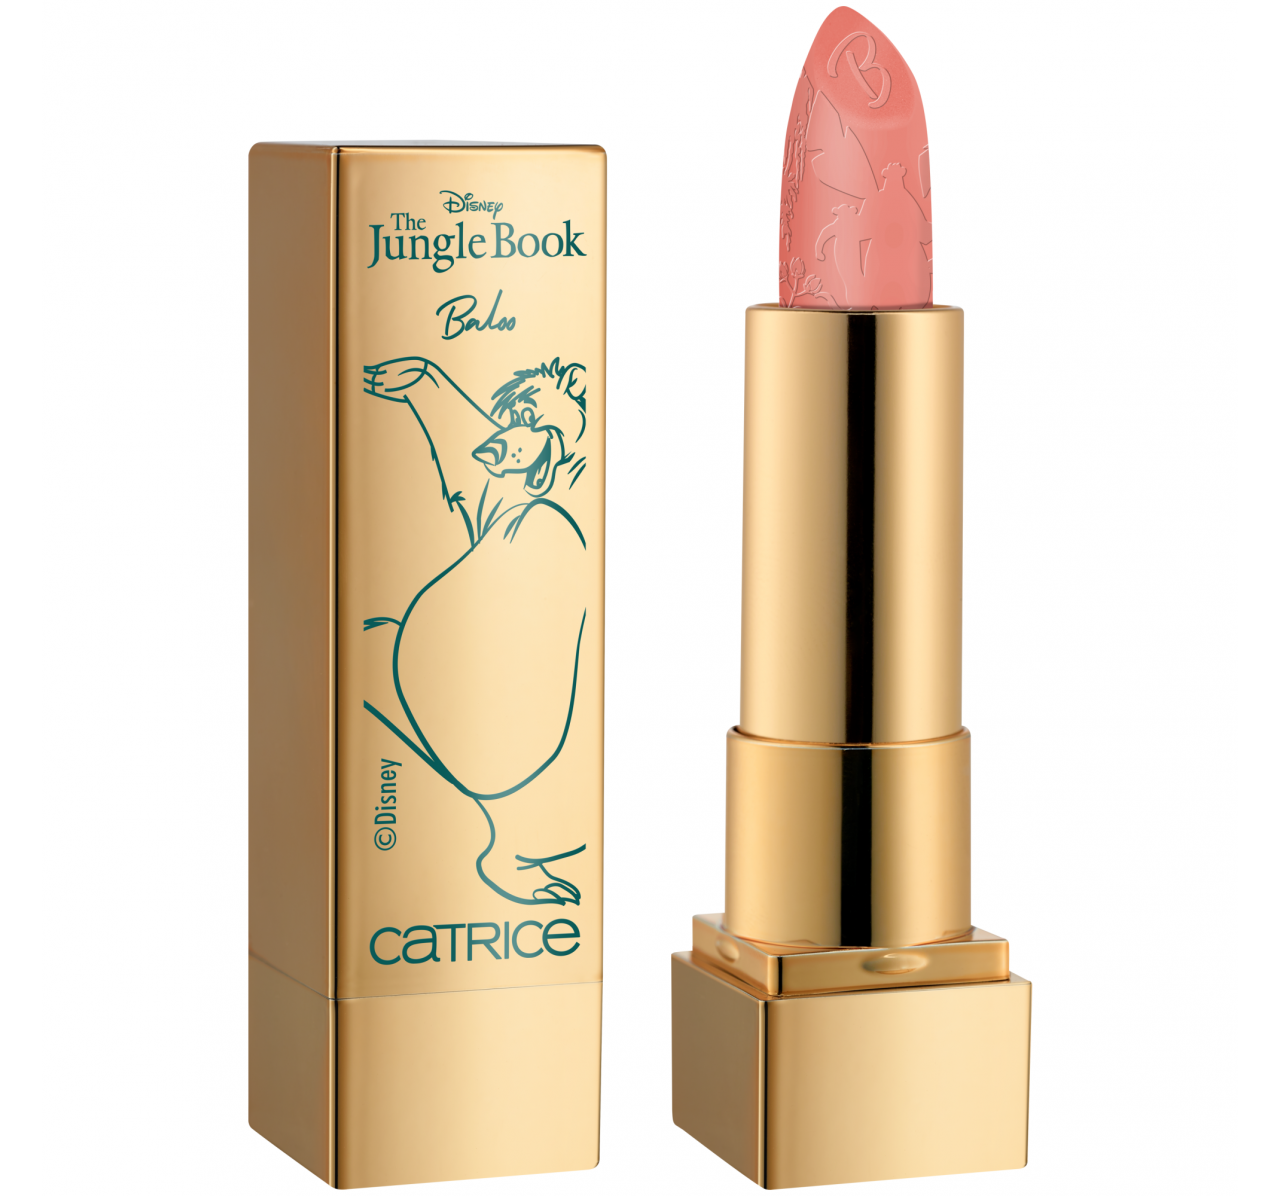 010 Book The The With Catrice Go Balm Jungle Lip Flow 3g Disney